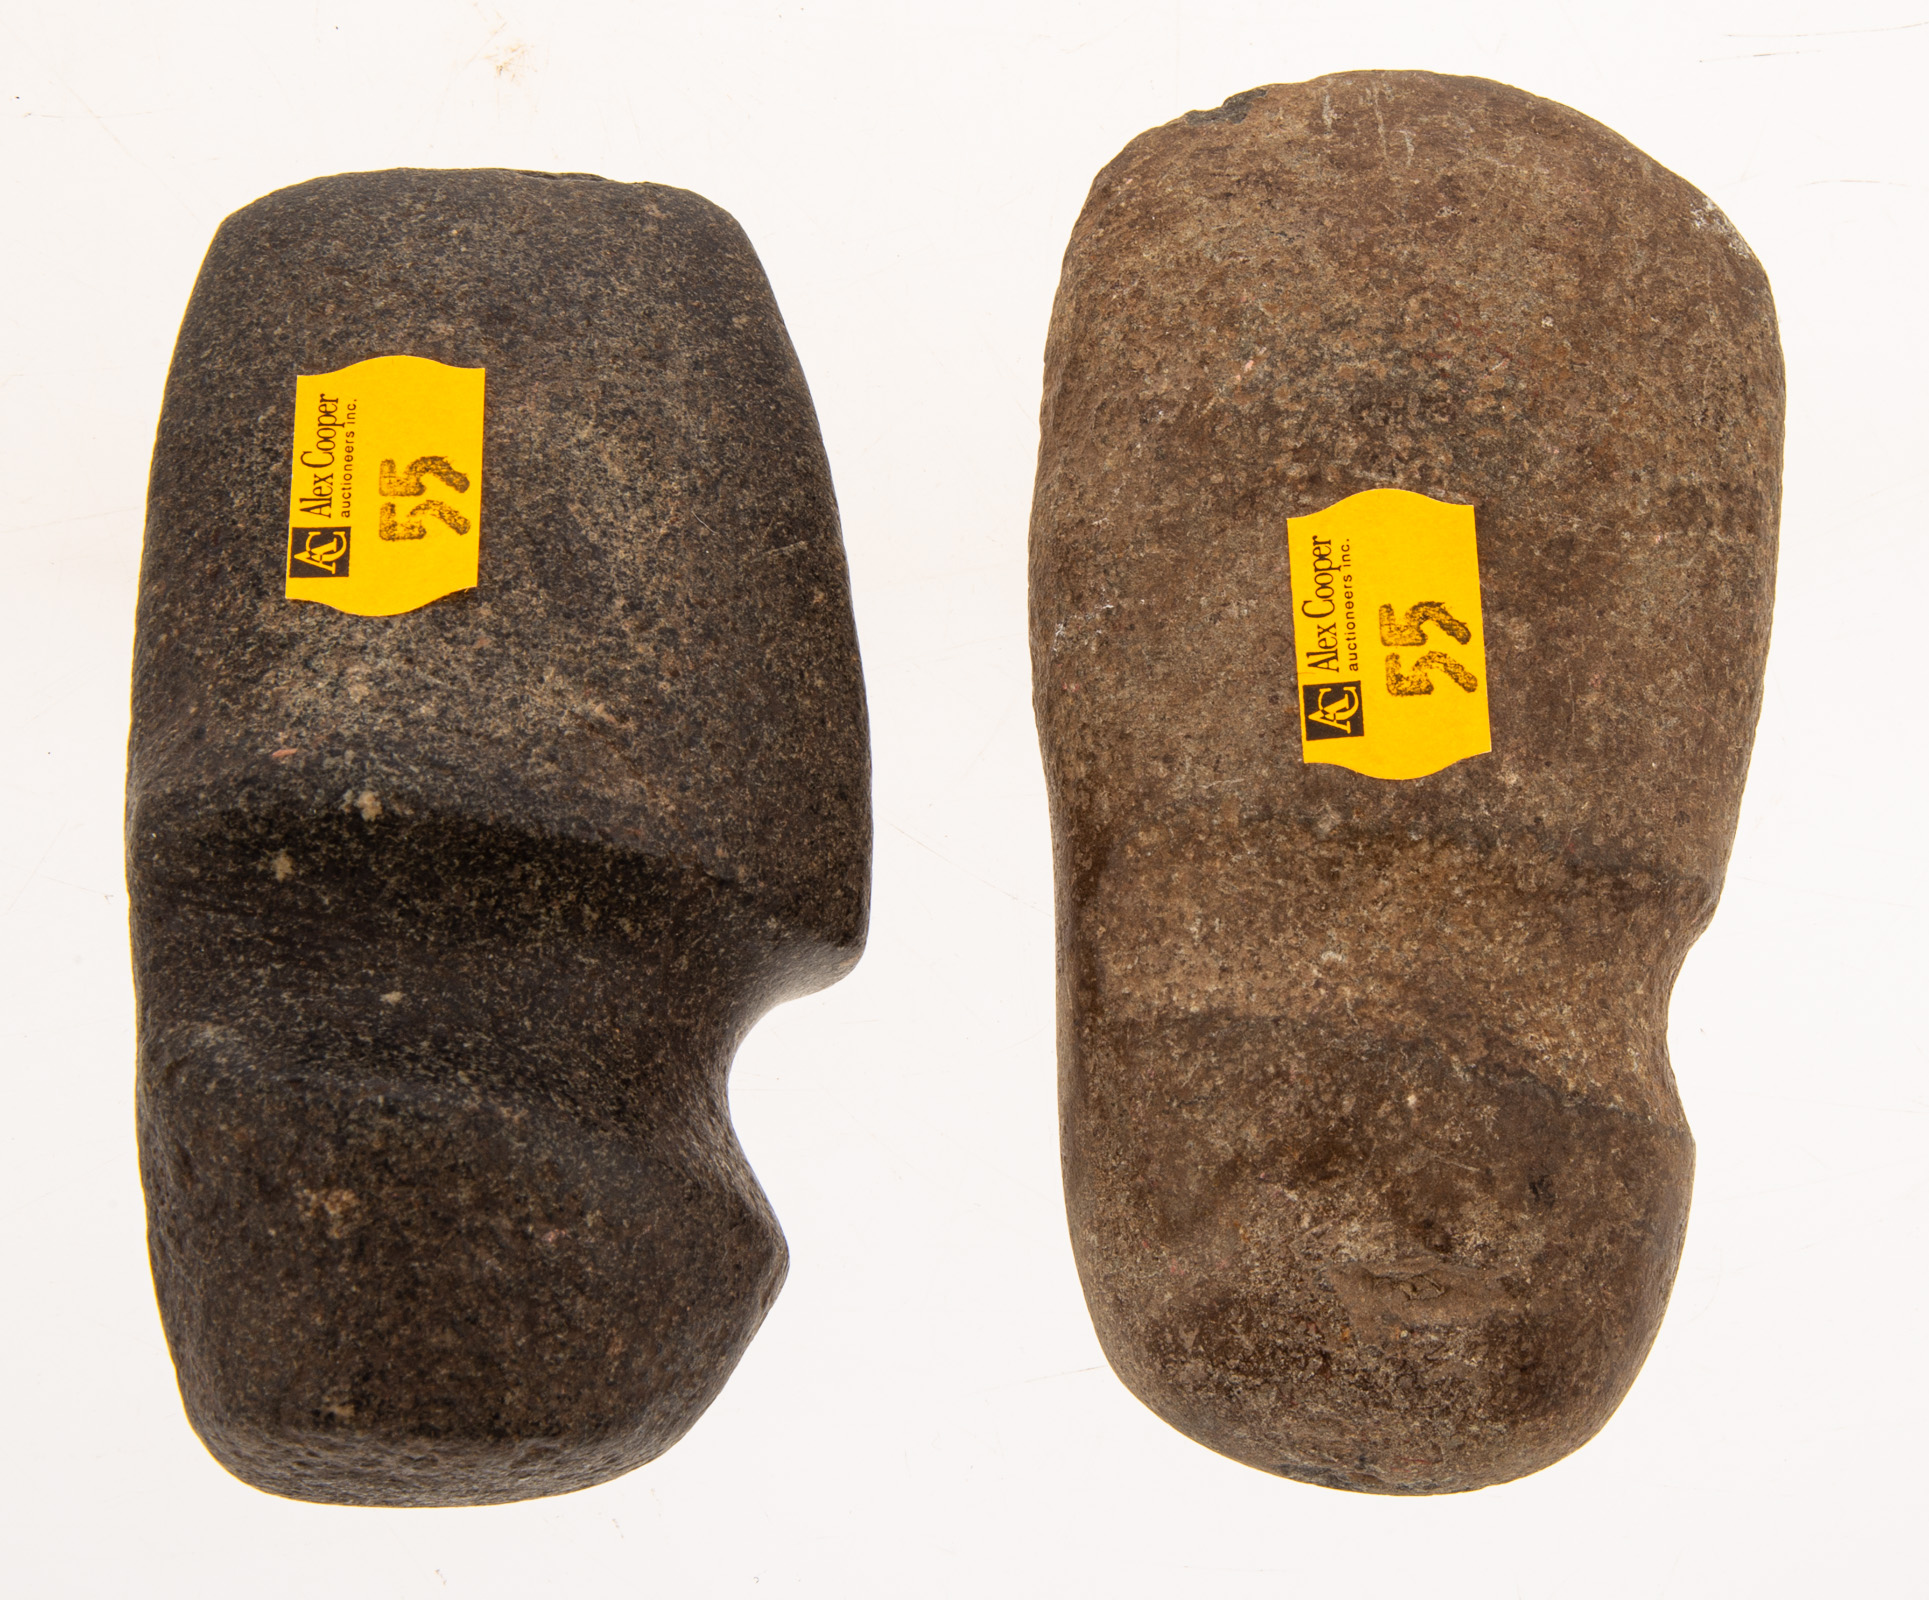 TWO NATIVE AMERICAN STONE AXE HEADS